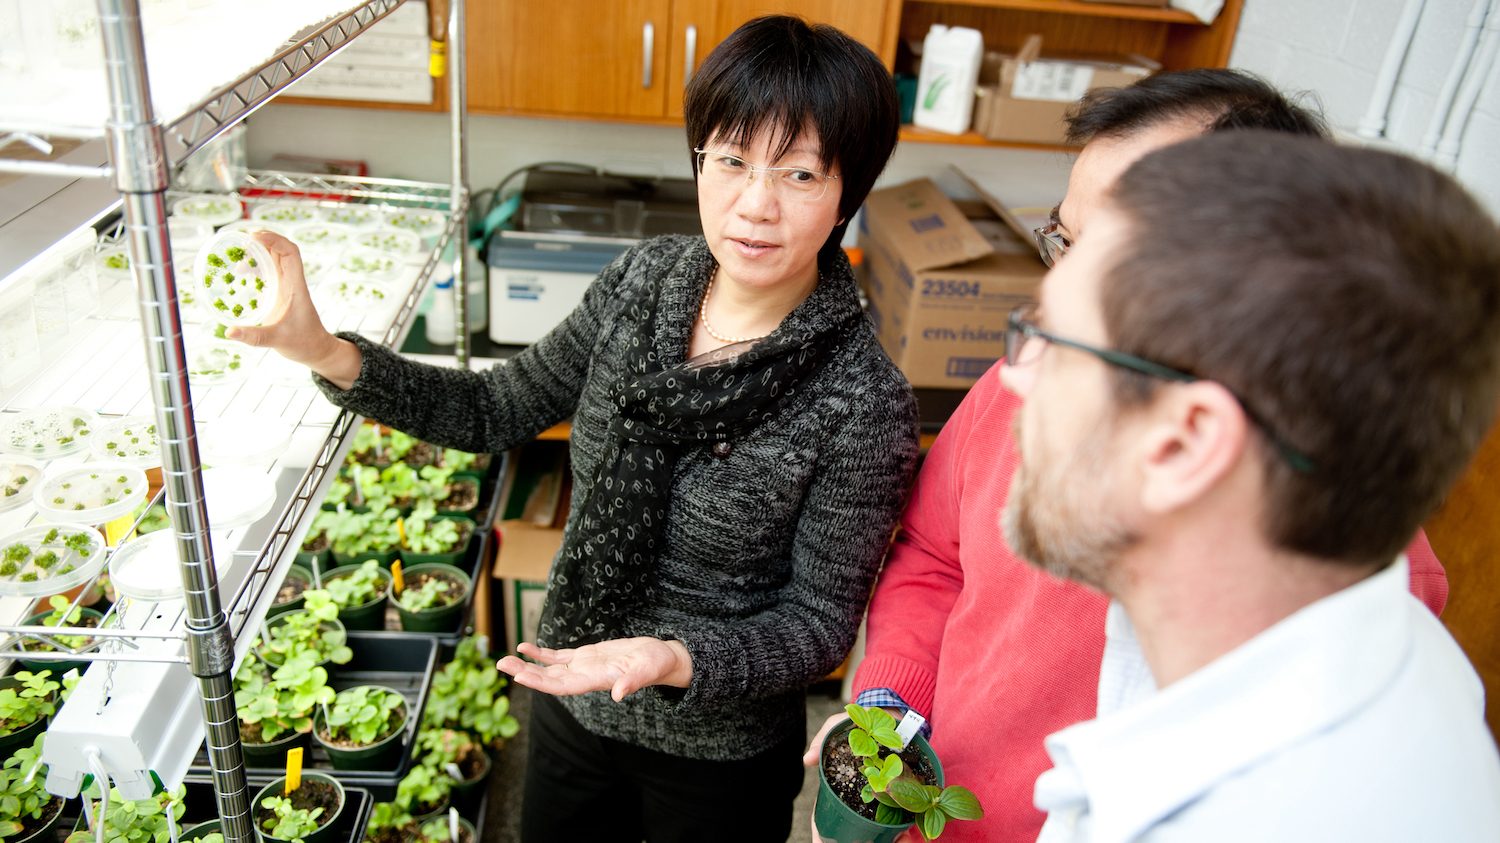 Researchers Qing Ma, Xiang Liu, Dr. Jenny Xiang and Dr. Deyu Xie work with dogwood plants in the Phytotron.